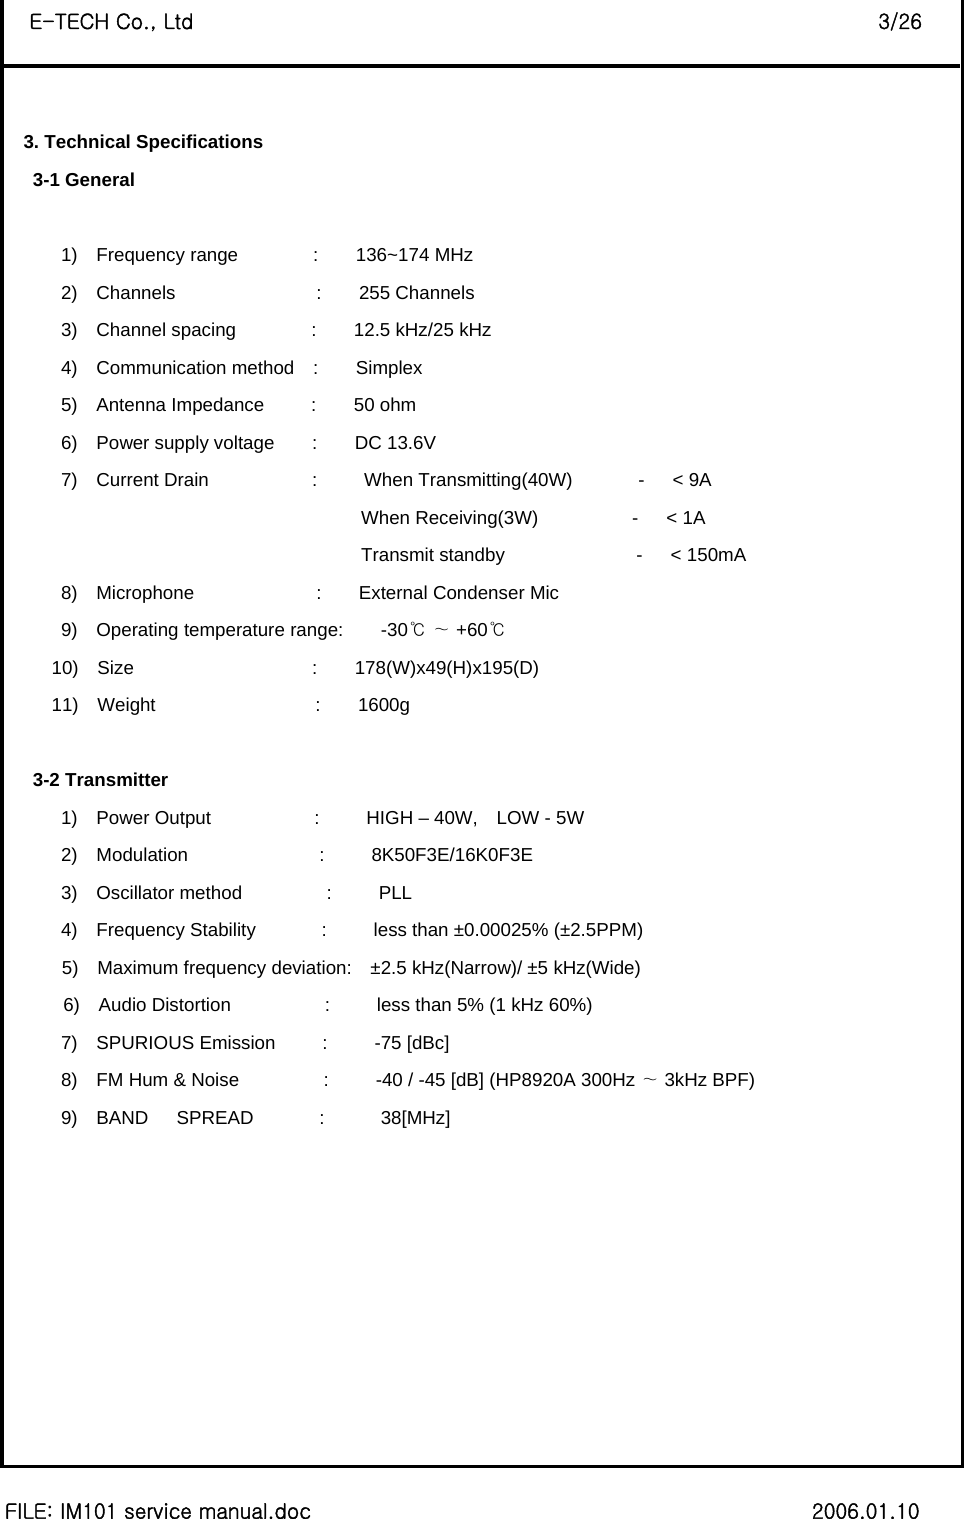 8 FILE: IM101 service manual.doc                                                 2006.01.10 E-TECH Co., Ltd                                                                   3/26  3. Technical Specifications    3-1 General         1)  Frequency range        :    136~174 MHz 2)  Channels               :    255 Channels 3)  Channel spacing        :    12.5 kHz/25 kHz 4)  Communication method  :    Simplex 5)  Antenna Impedance     :    50 ohm  6)  Power supply voltage    :    DC 13.6V 7)  Current Drain           :     When Transmitting(40W)       -   &lt; 9A                                       When Receiving(3W)          -   &lt; 1A                                       Transmit standby              -   &lt; 150mA 8)  Microphone             :    External Condenser Mic 9)  Operating temperature range:    -30    +60℃∼ ℃      10)  Size                   :    178(W)x49(H)x195(D)  11)  Weight                 :    1600g     3-2 Transmitter       1)  Power Output           :     HIGH – 40W,  LOW - 5W       2)  Modulation              :     8K50F3E/16K0F3E       3)  Oscillator method         :     PLL       4)  Frequency Stability       :     less than ±0.00025% (±2.5PPM) 5)  Maximum frequency deviation:  ±2.5 kHz(Narrow)/ ±5 kHz(Wide) 6)  Audio Distortion          :     less than 5% (1 kHz 60%)       7)  SPURIOUS Emission     :     -75 [dBc]       8)  FM Hum &amp; Noise         :     -40 / -45 [dB] (HP8920A 300Hz   3kHz BP∼F)        9)  BAND   SPREAD       :      38[MHz]          